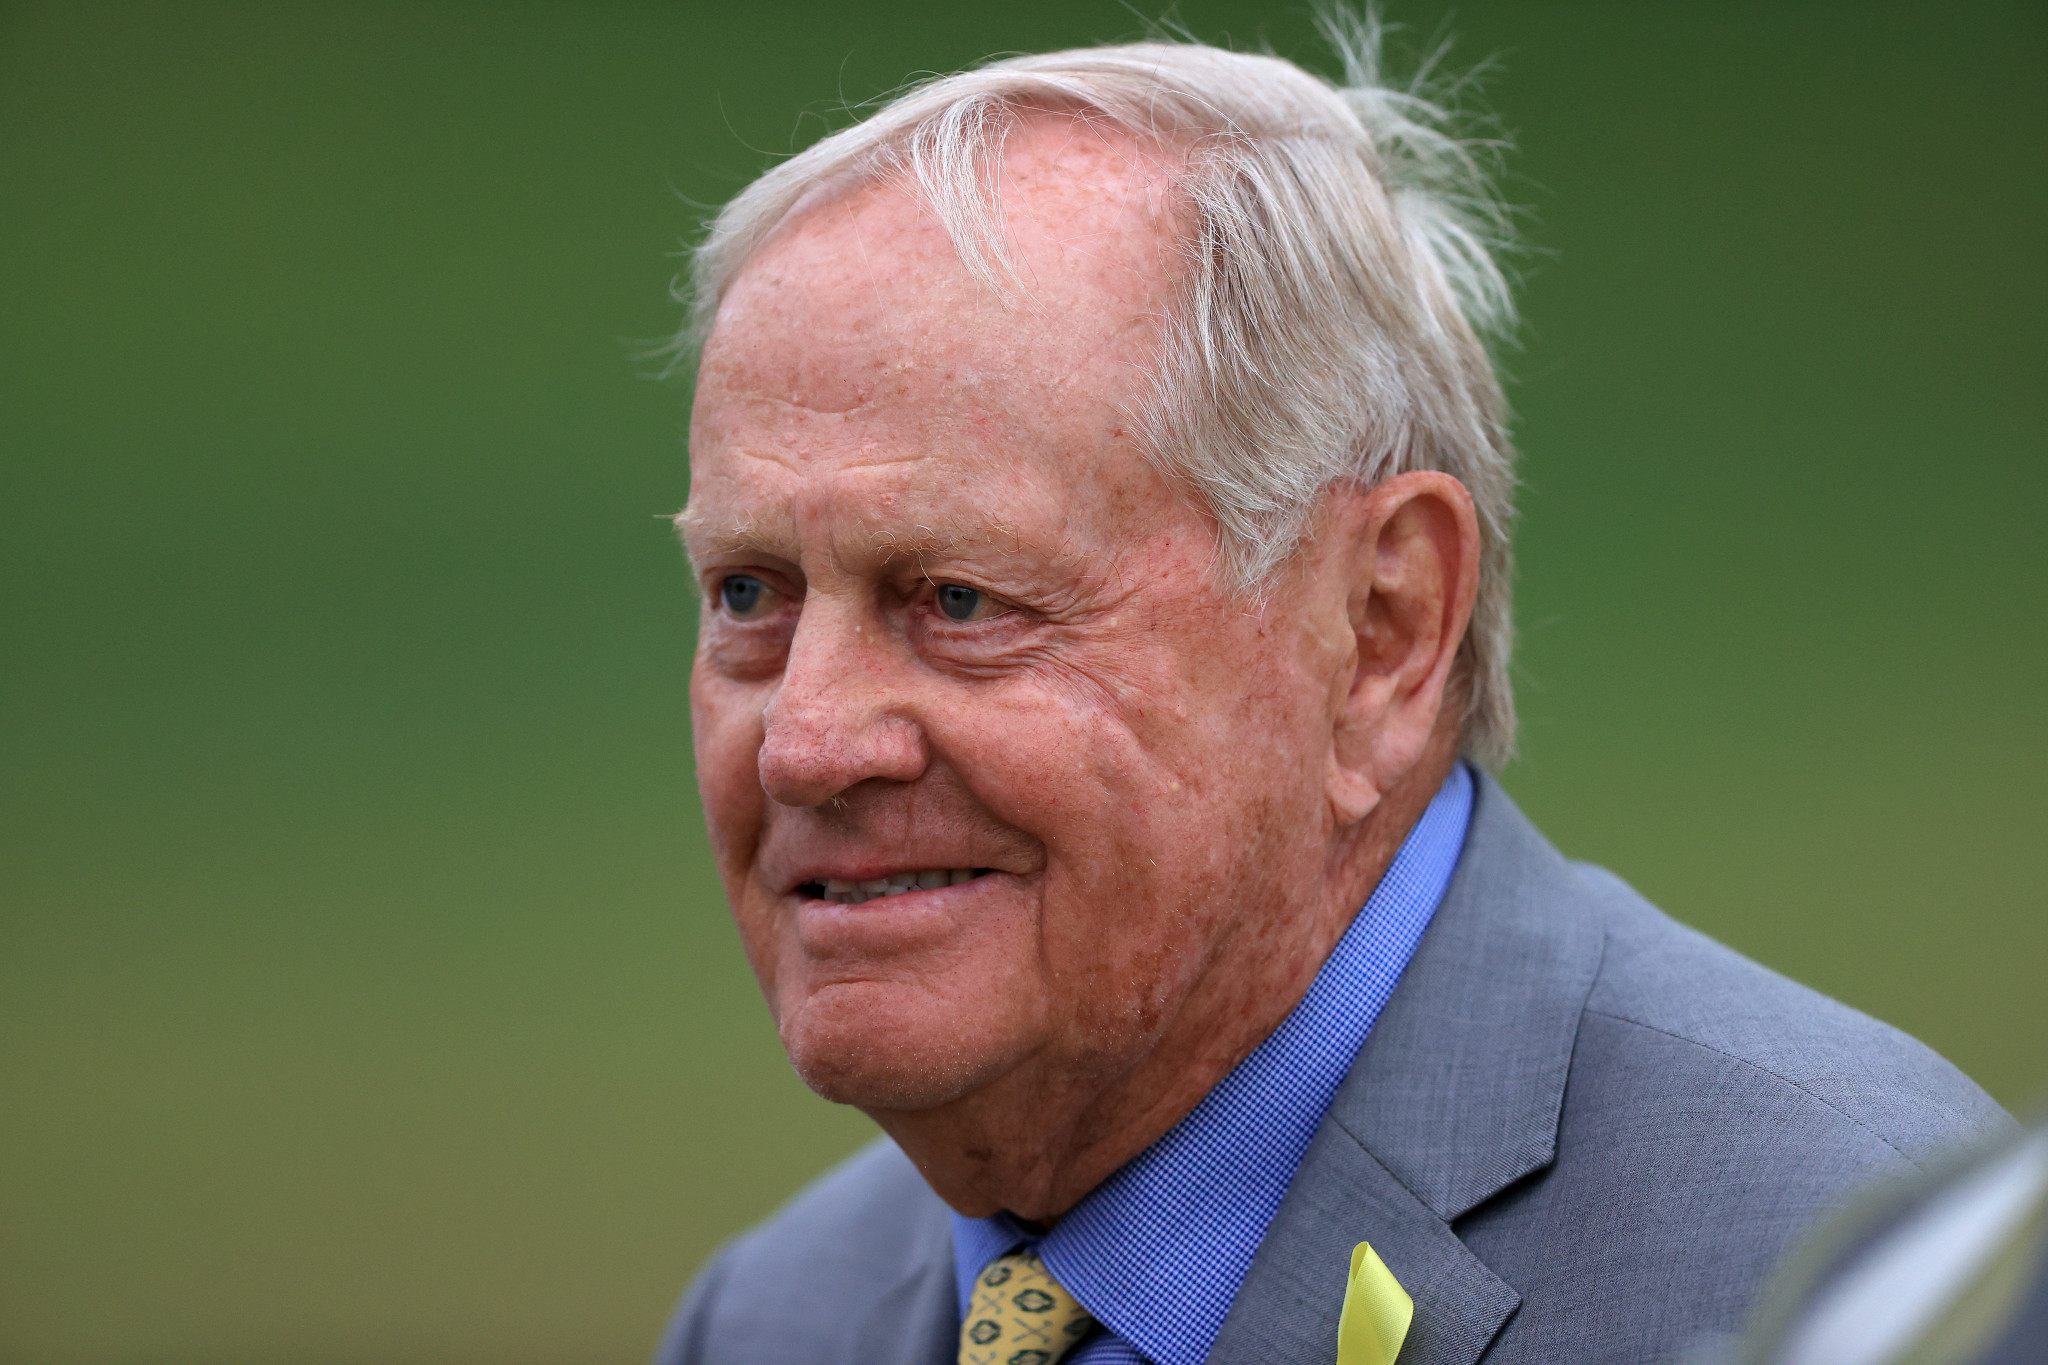 Golf legend Nicklaus reveals COVID-19 diagnosis in March